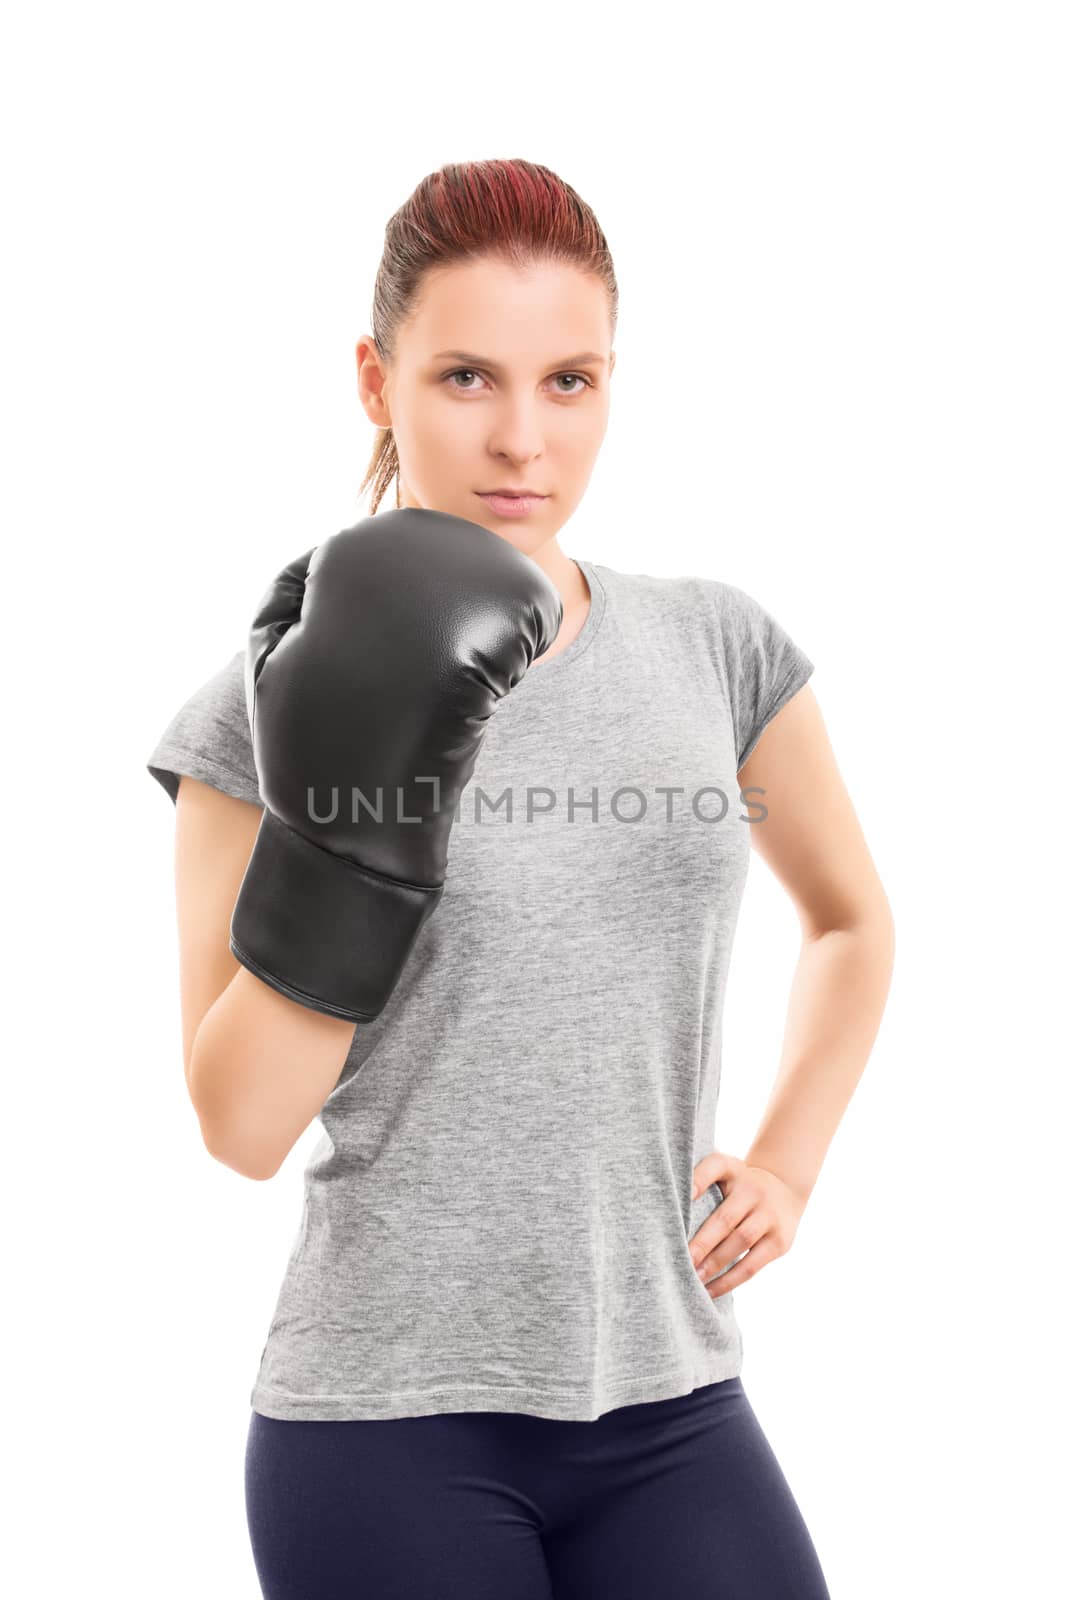 Portrait of a young girl with a boxing glove by Mendelex